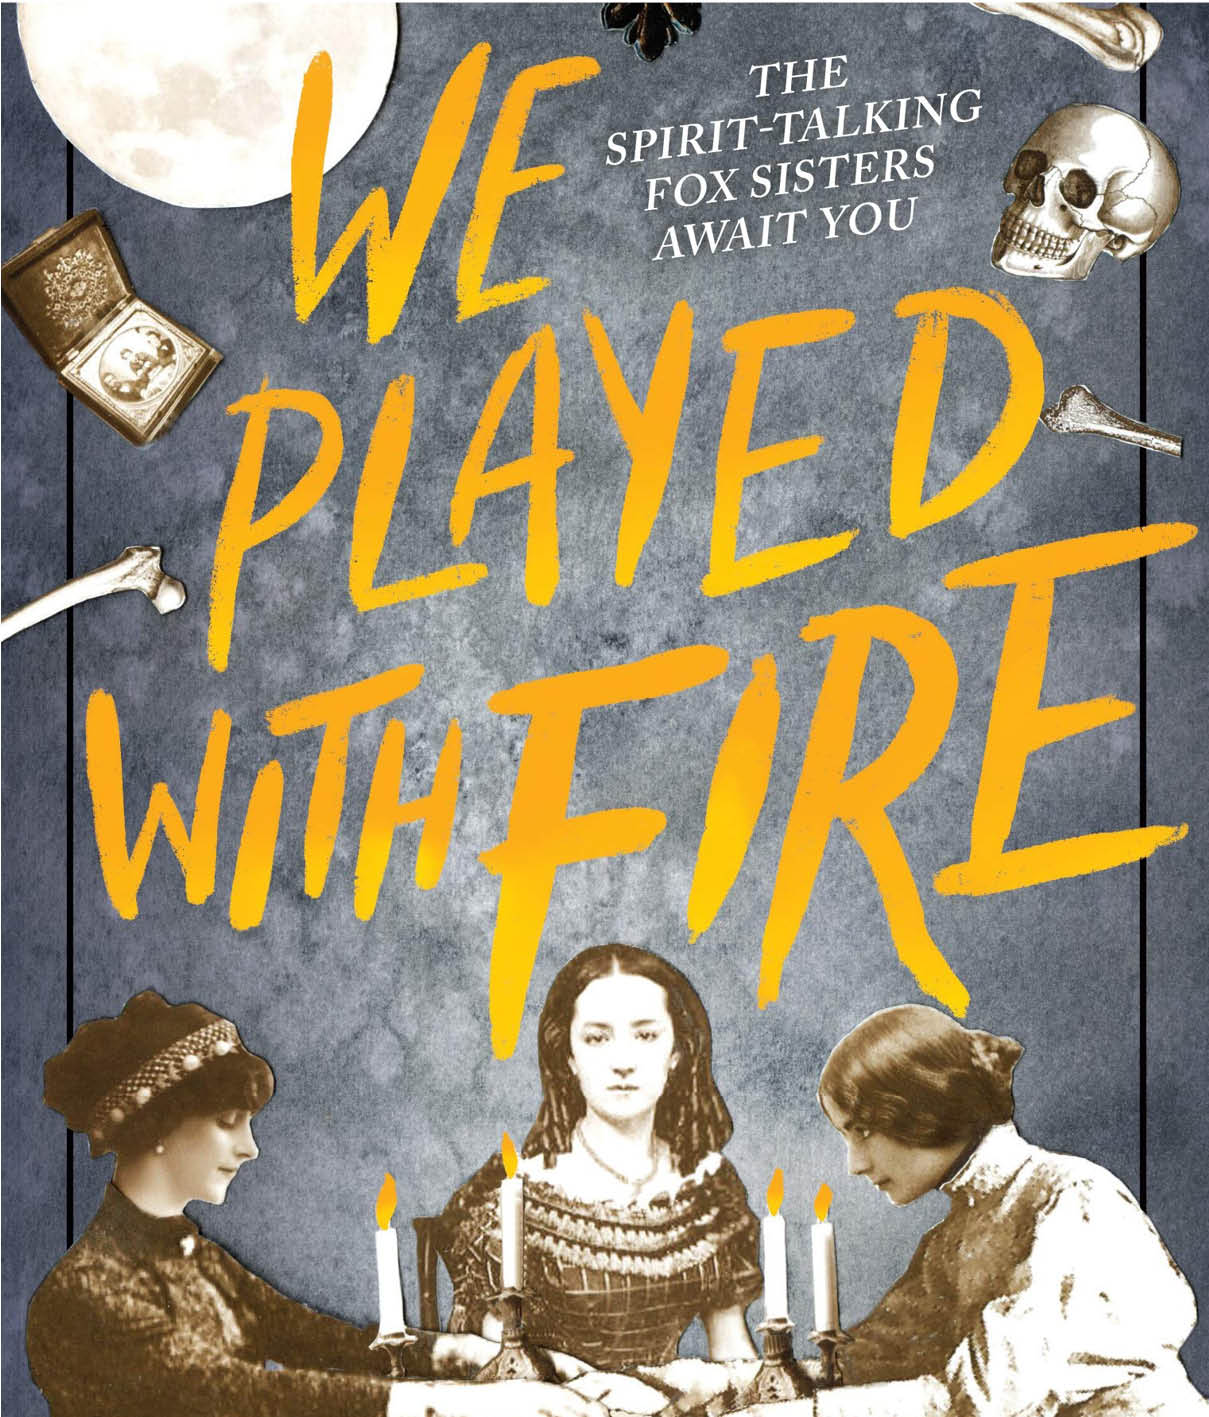 We Played With Fire by Catherine Barter